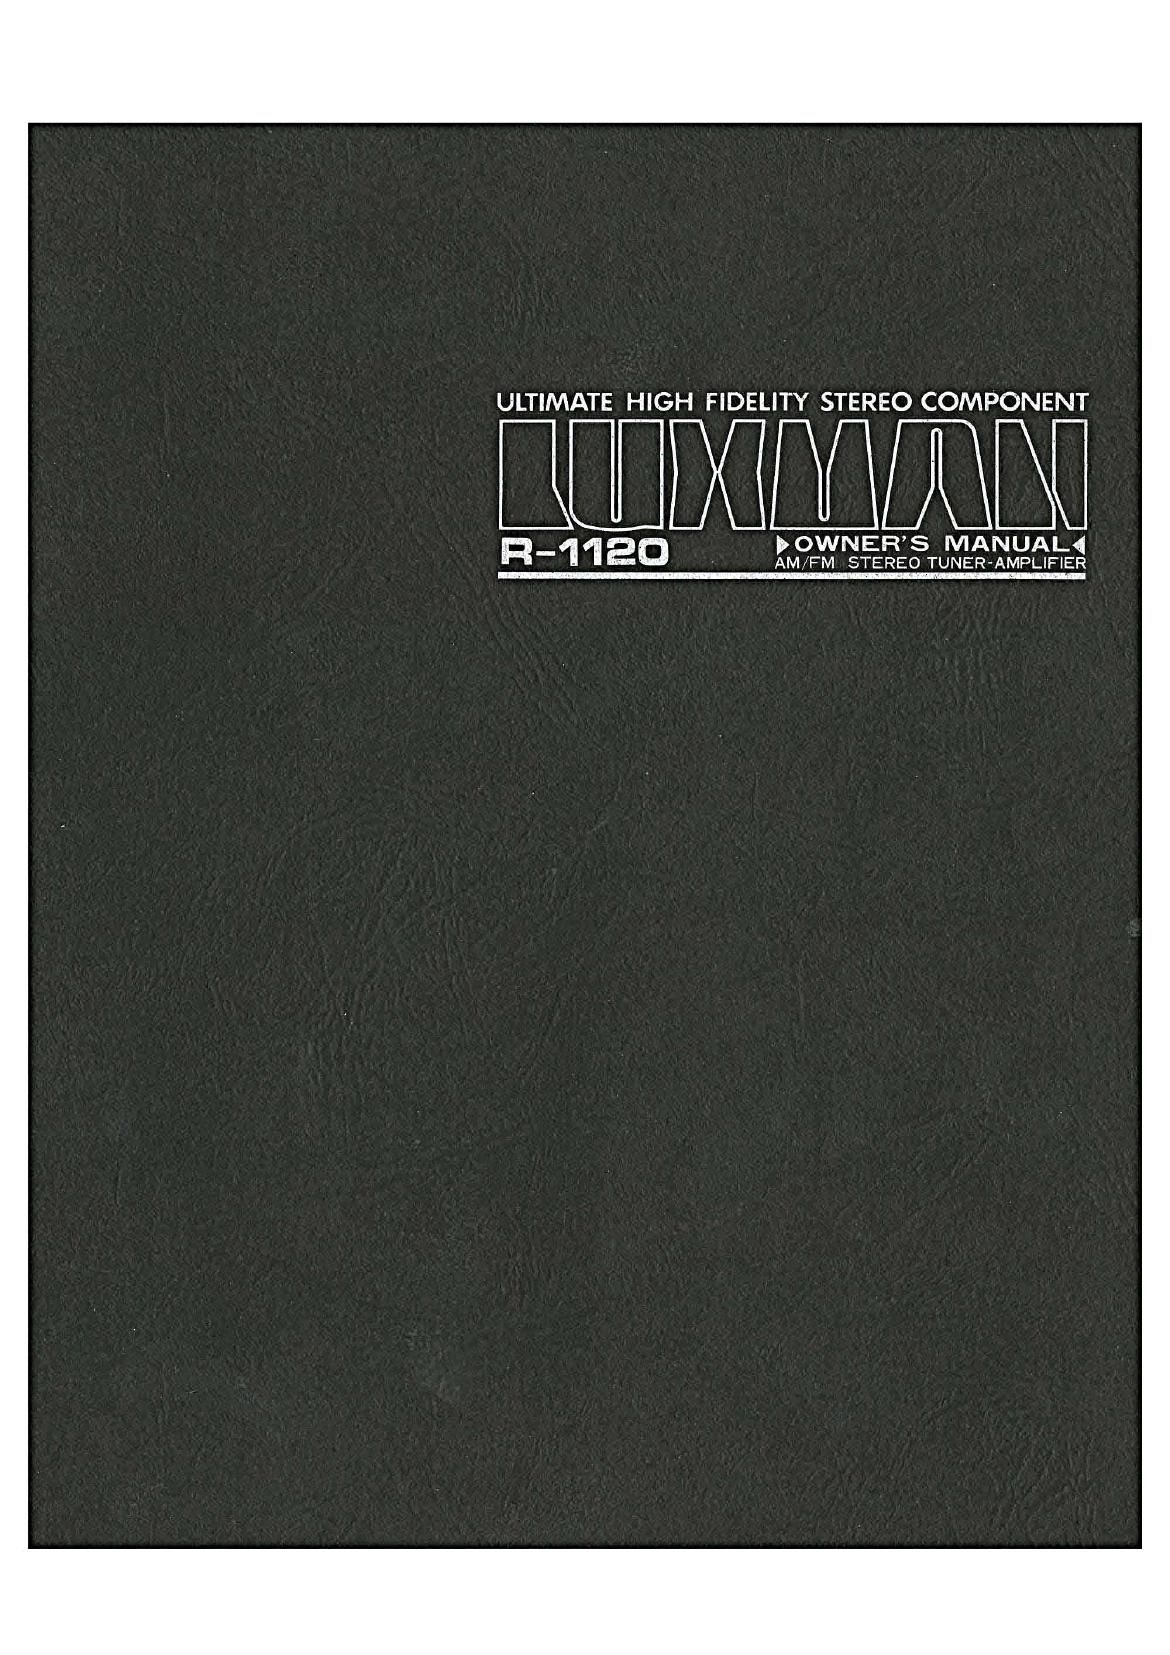 Luxman R 1120 Owners Manual